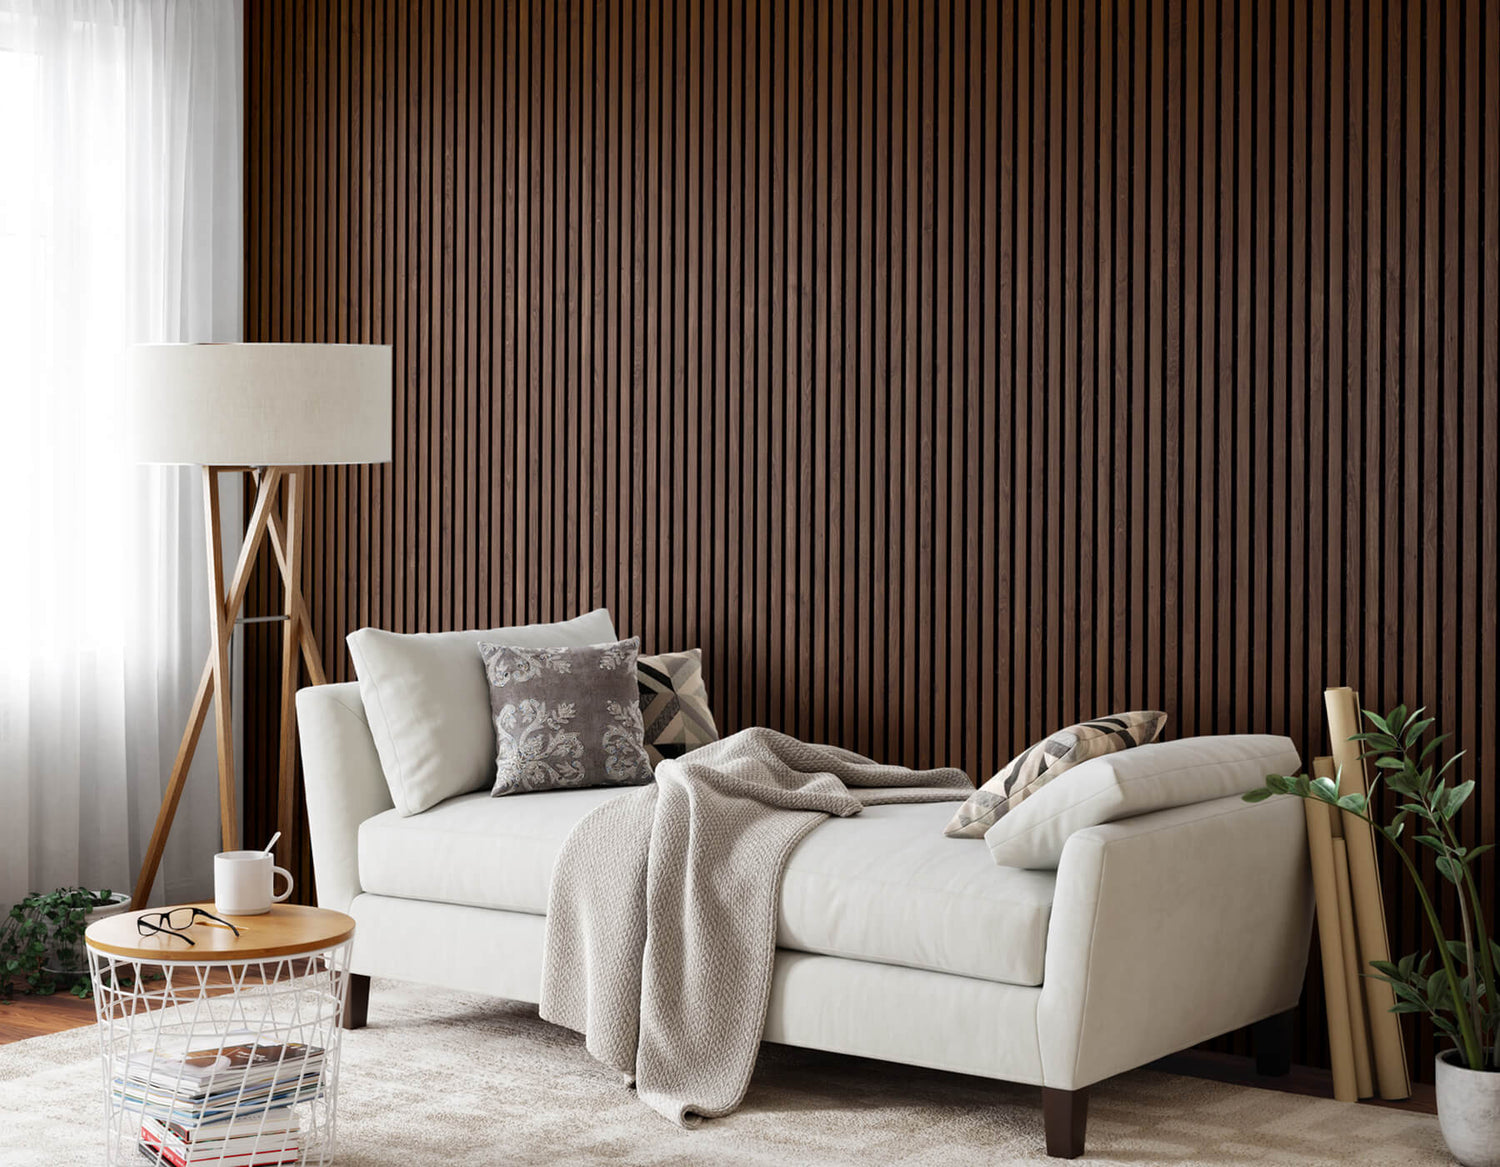 Shop our complete range of interior wall paneling.